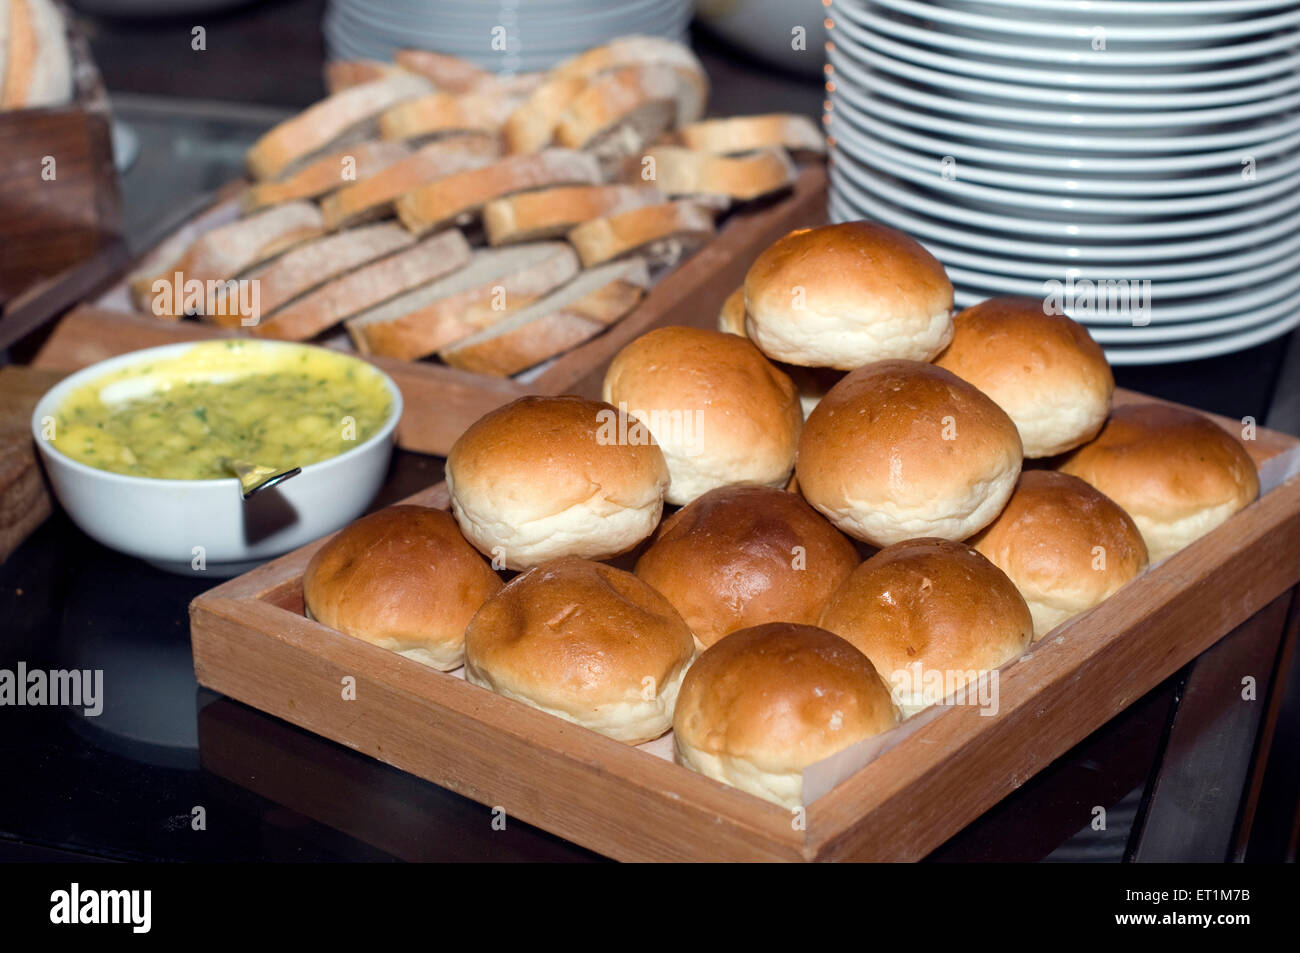 Bun and sliced bread dishes with chutney laid on a table Pune Maharashtra India Asia Stock Photo